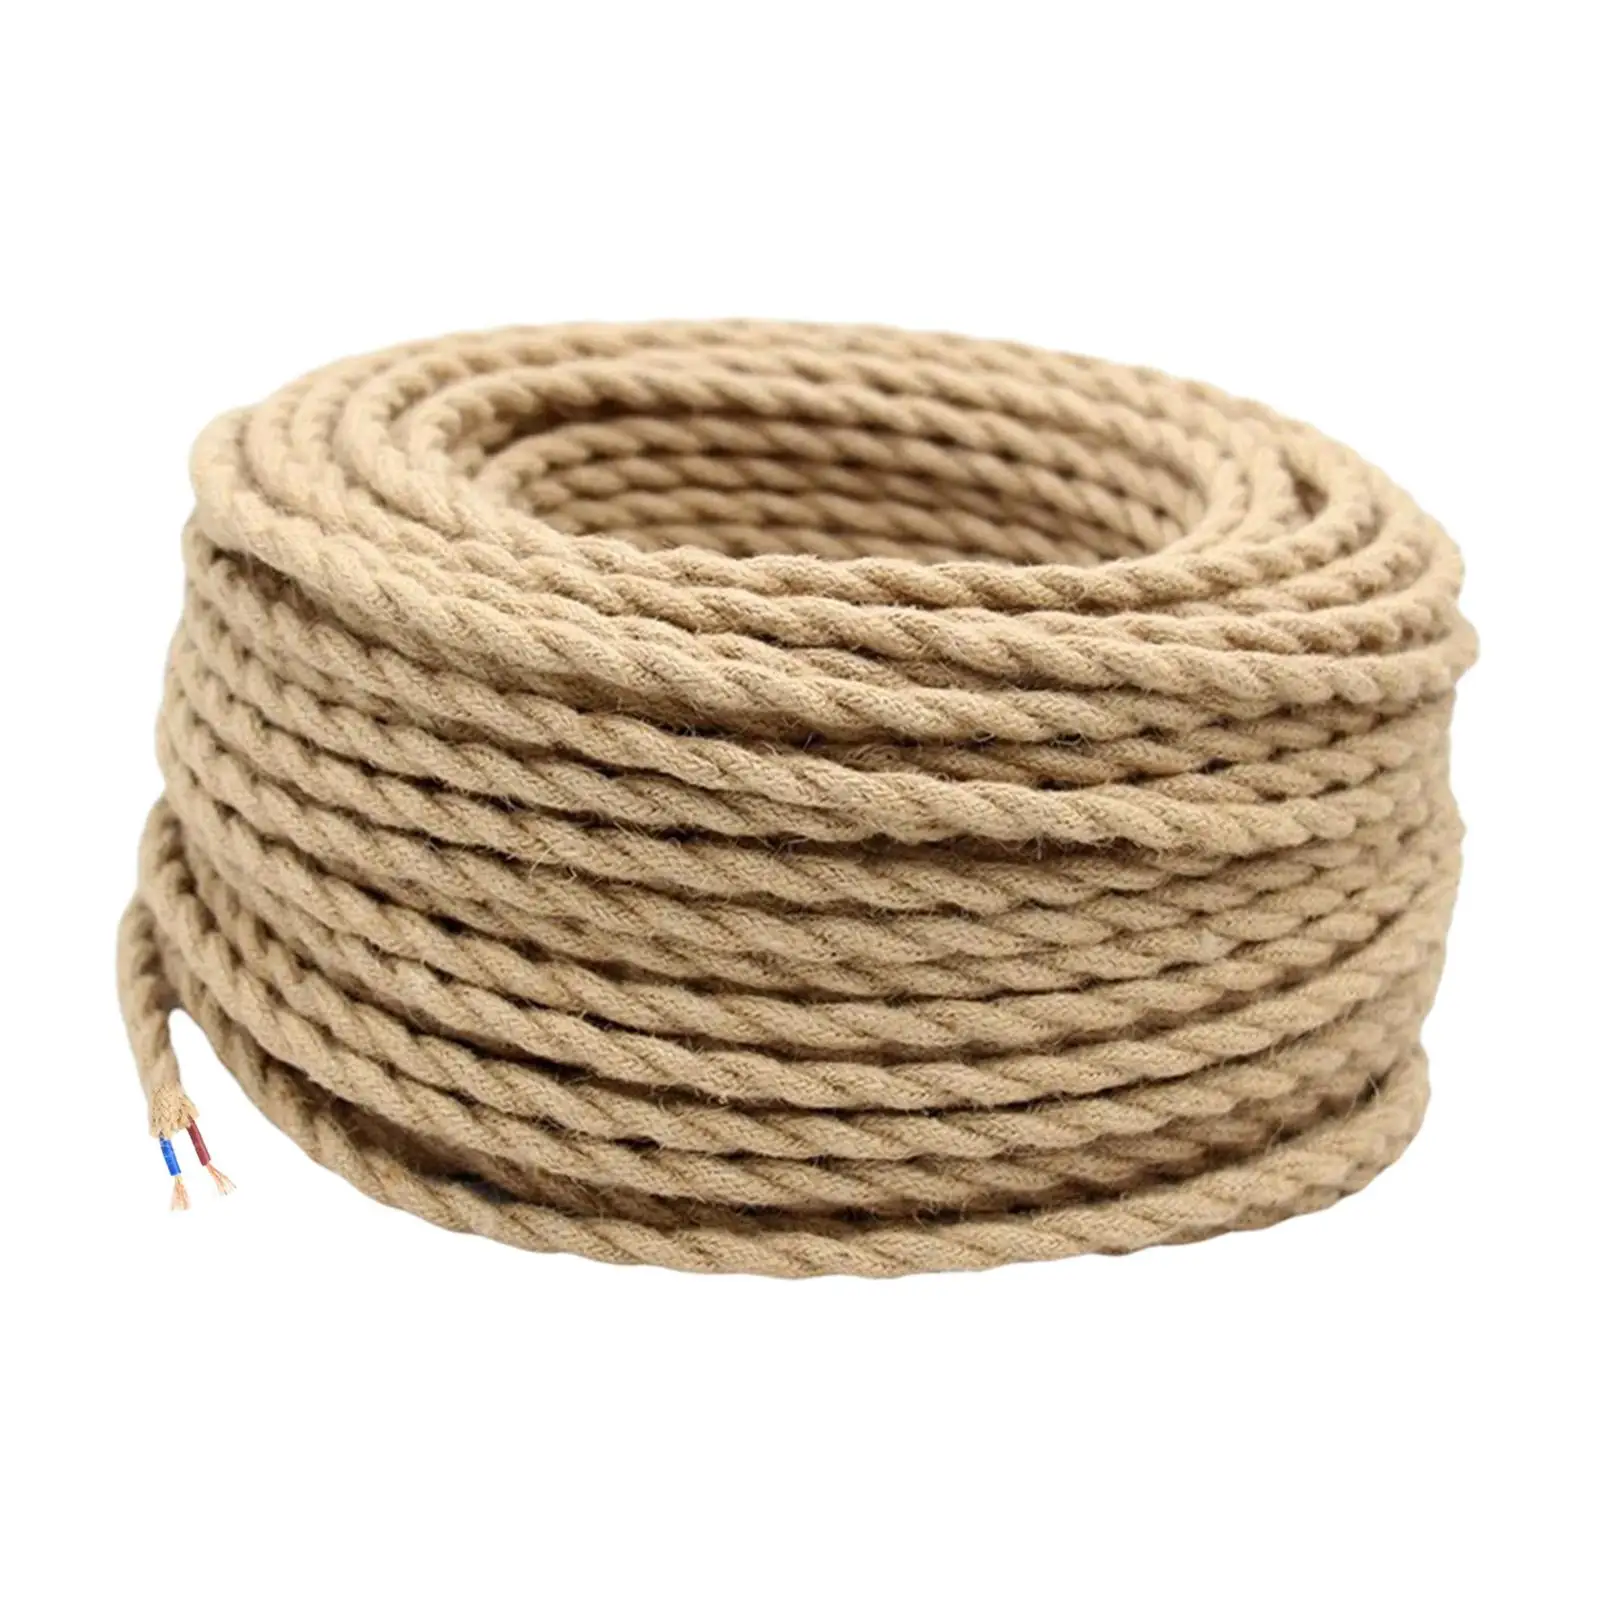 Twisted Braided Linen Line 5M Hanging Light Cord Kits Electrical Cord for Bar Industrial Lighting Office Farmhouse DIY Projects